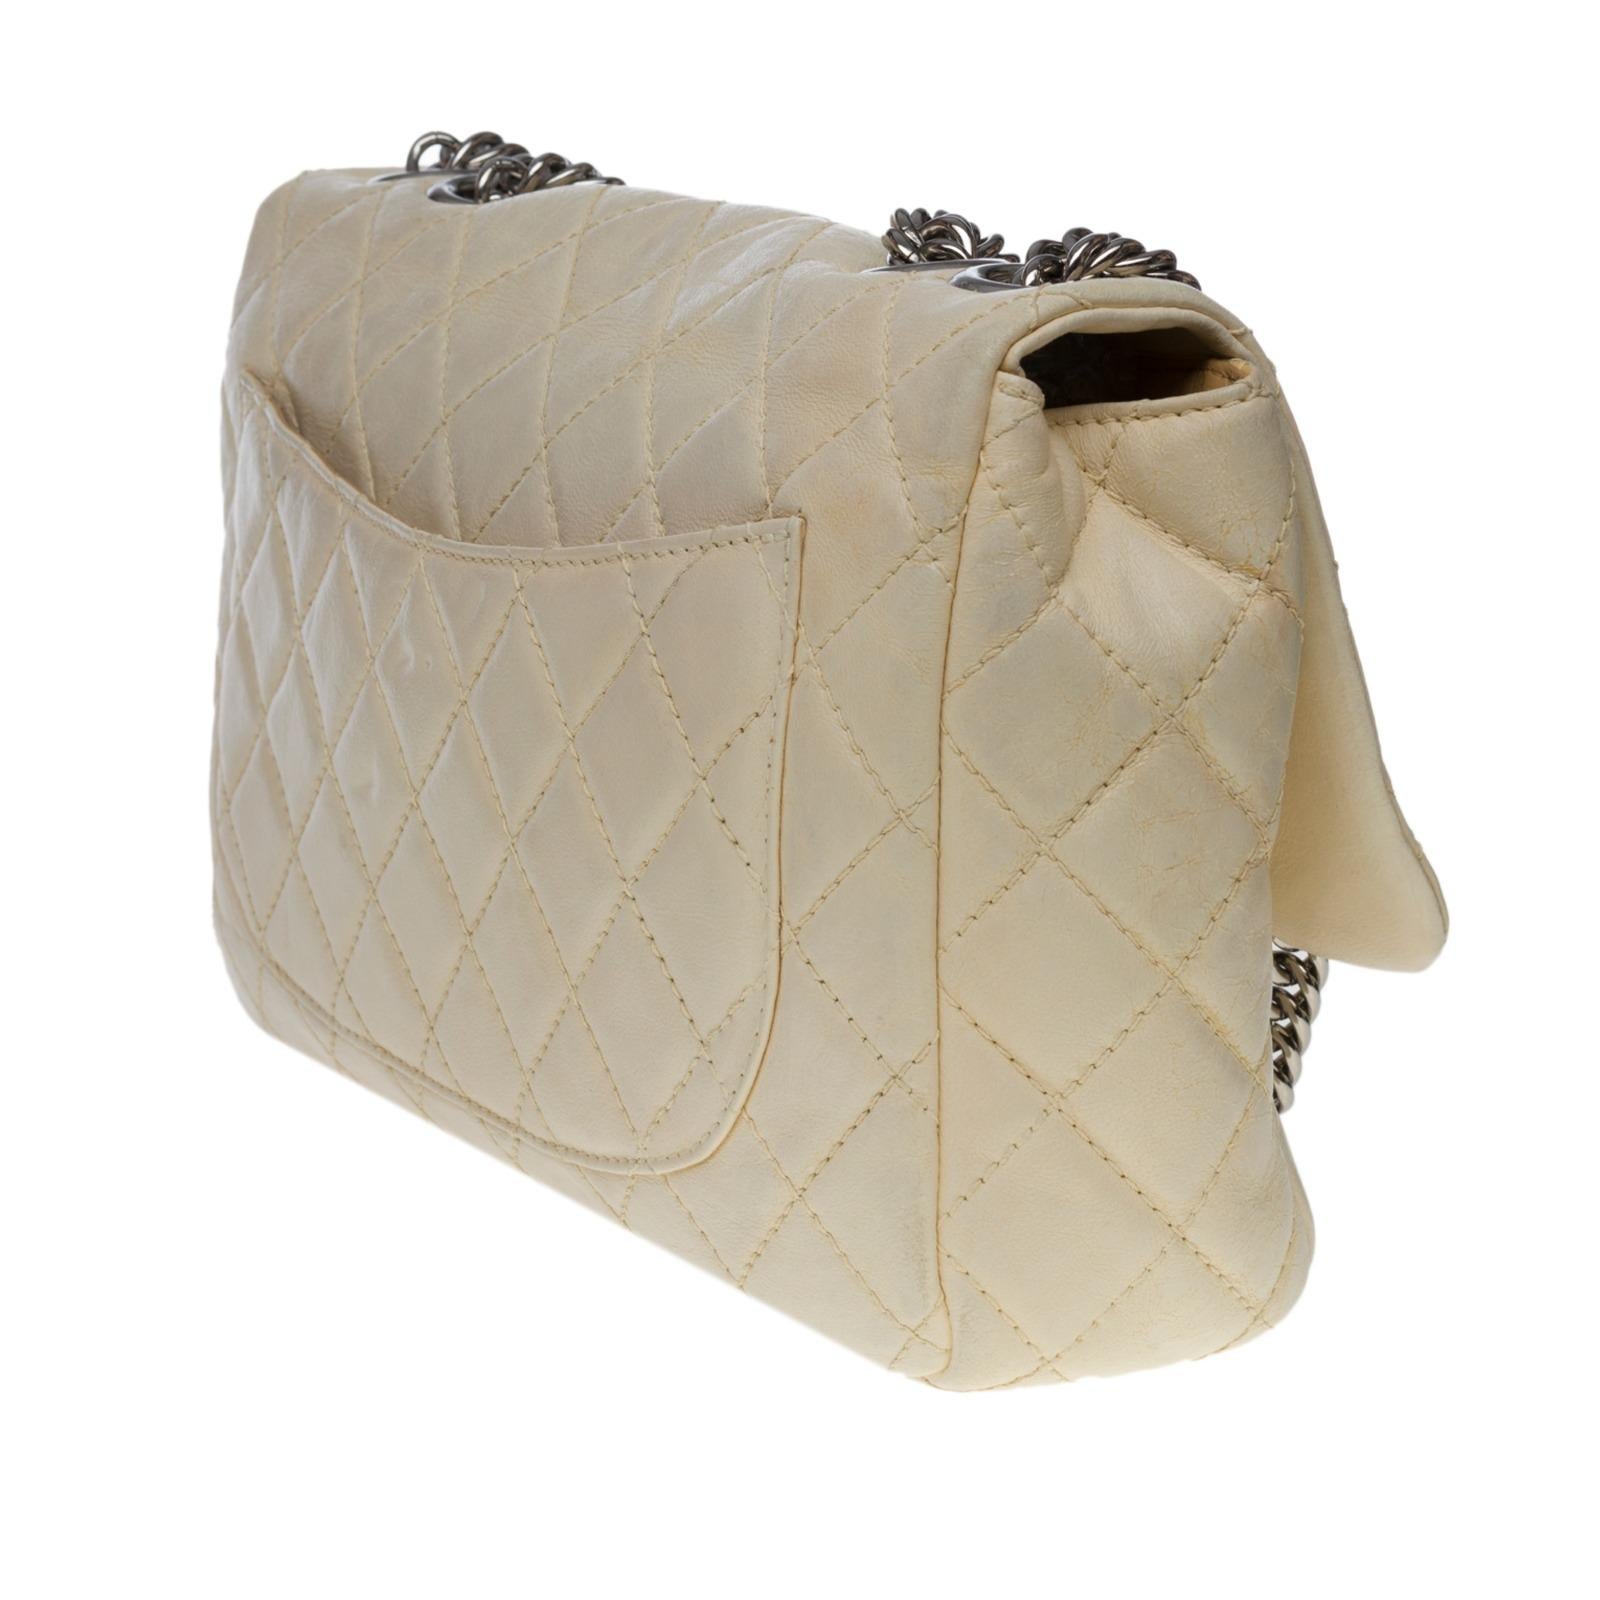 Chanel Timeless/Classique Jumbo Flap bag handbag in ecru quilted lambskin, SHW For Sale 1